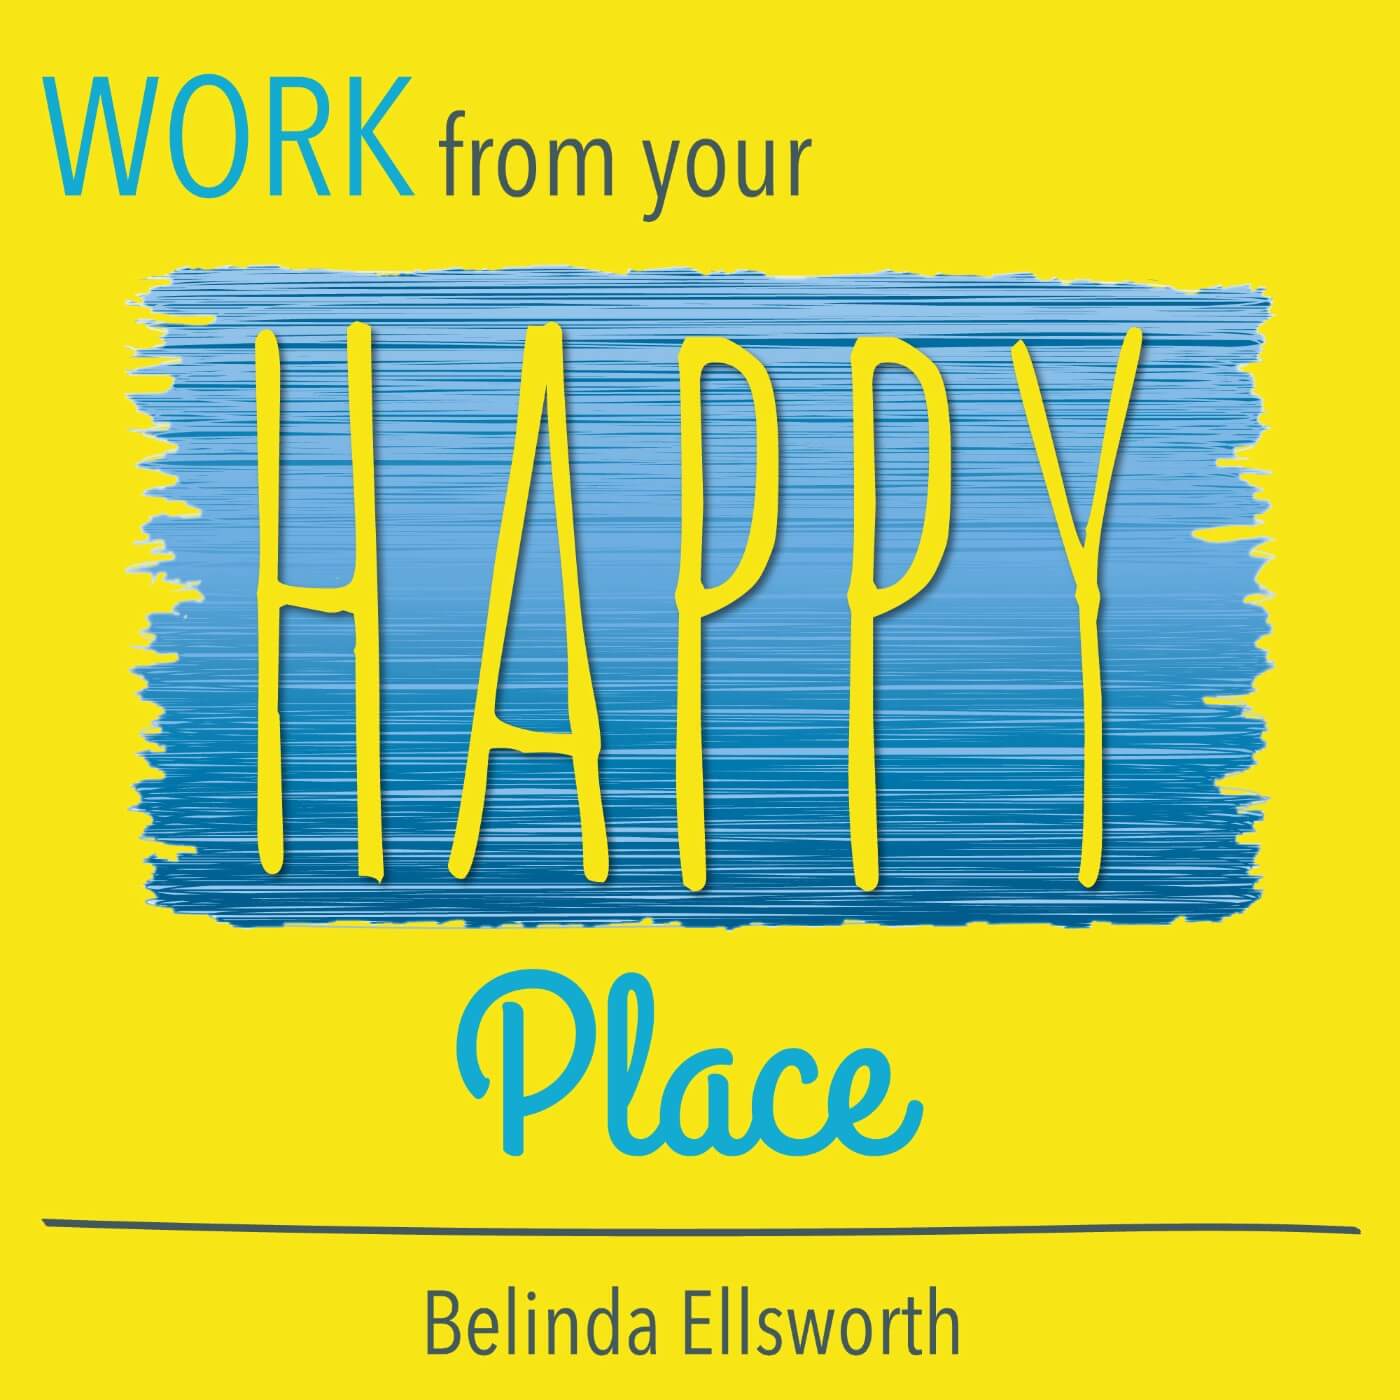 work from your happy place logo